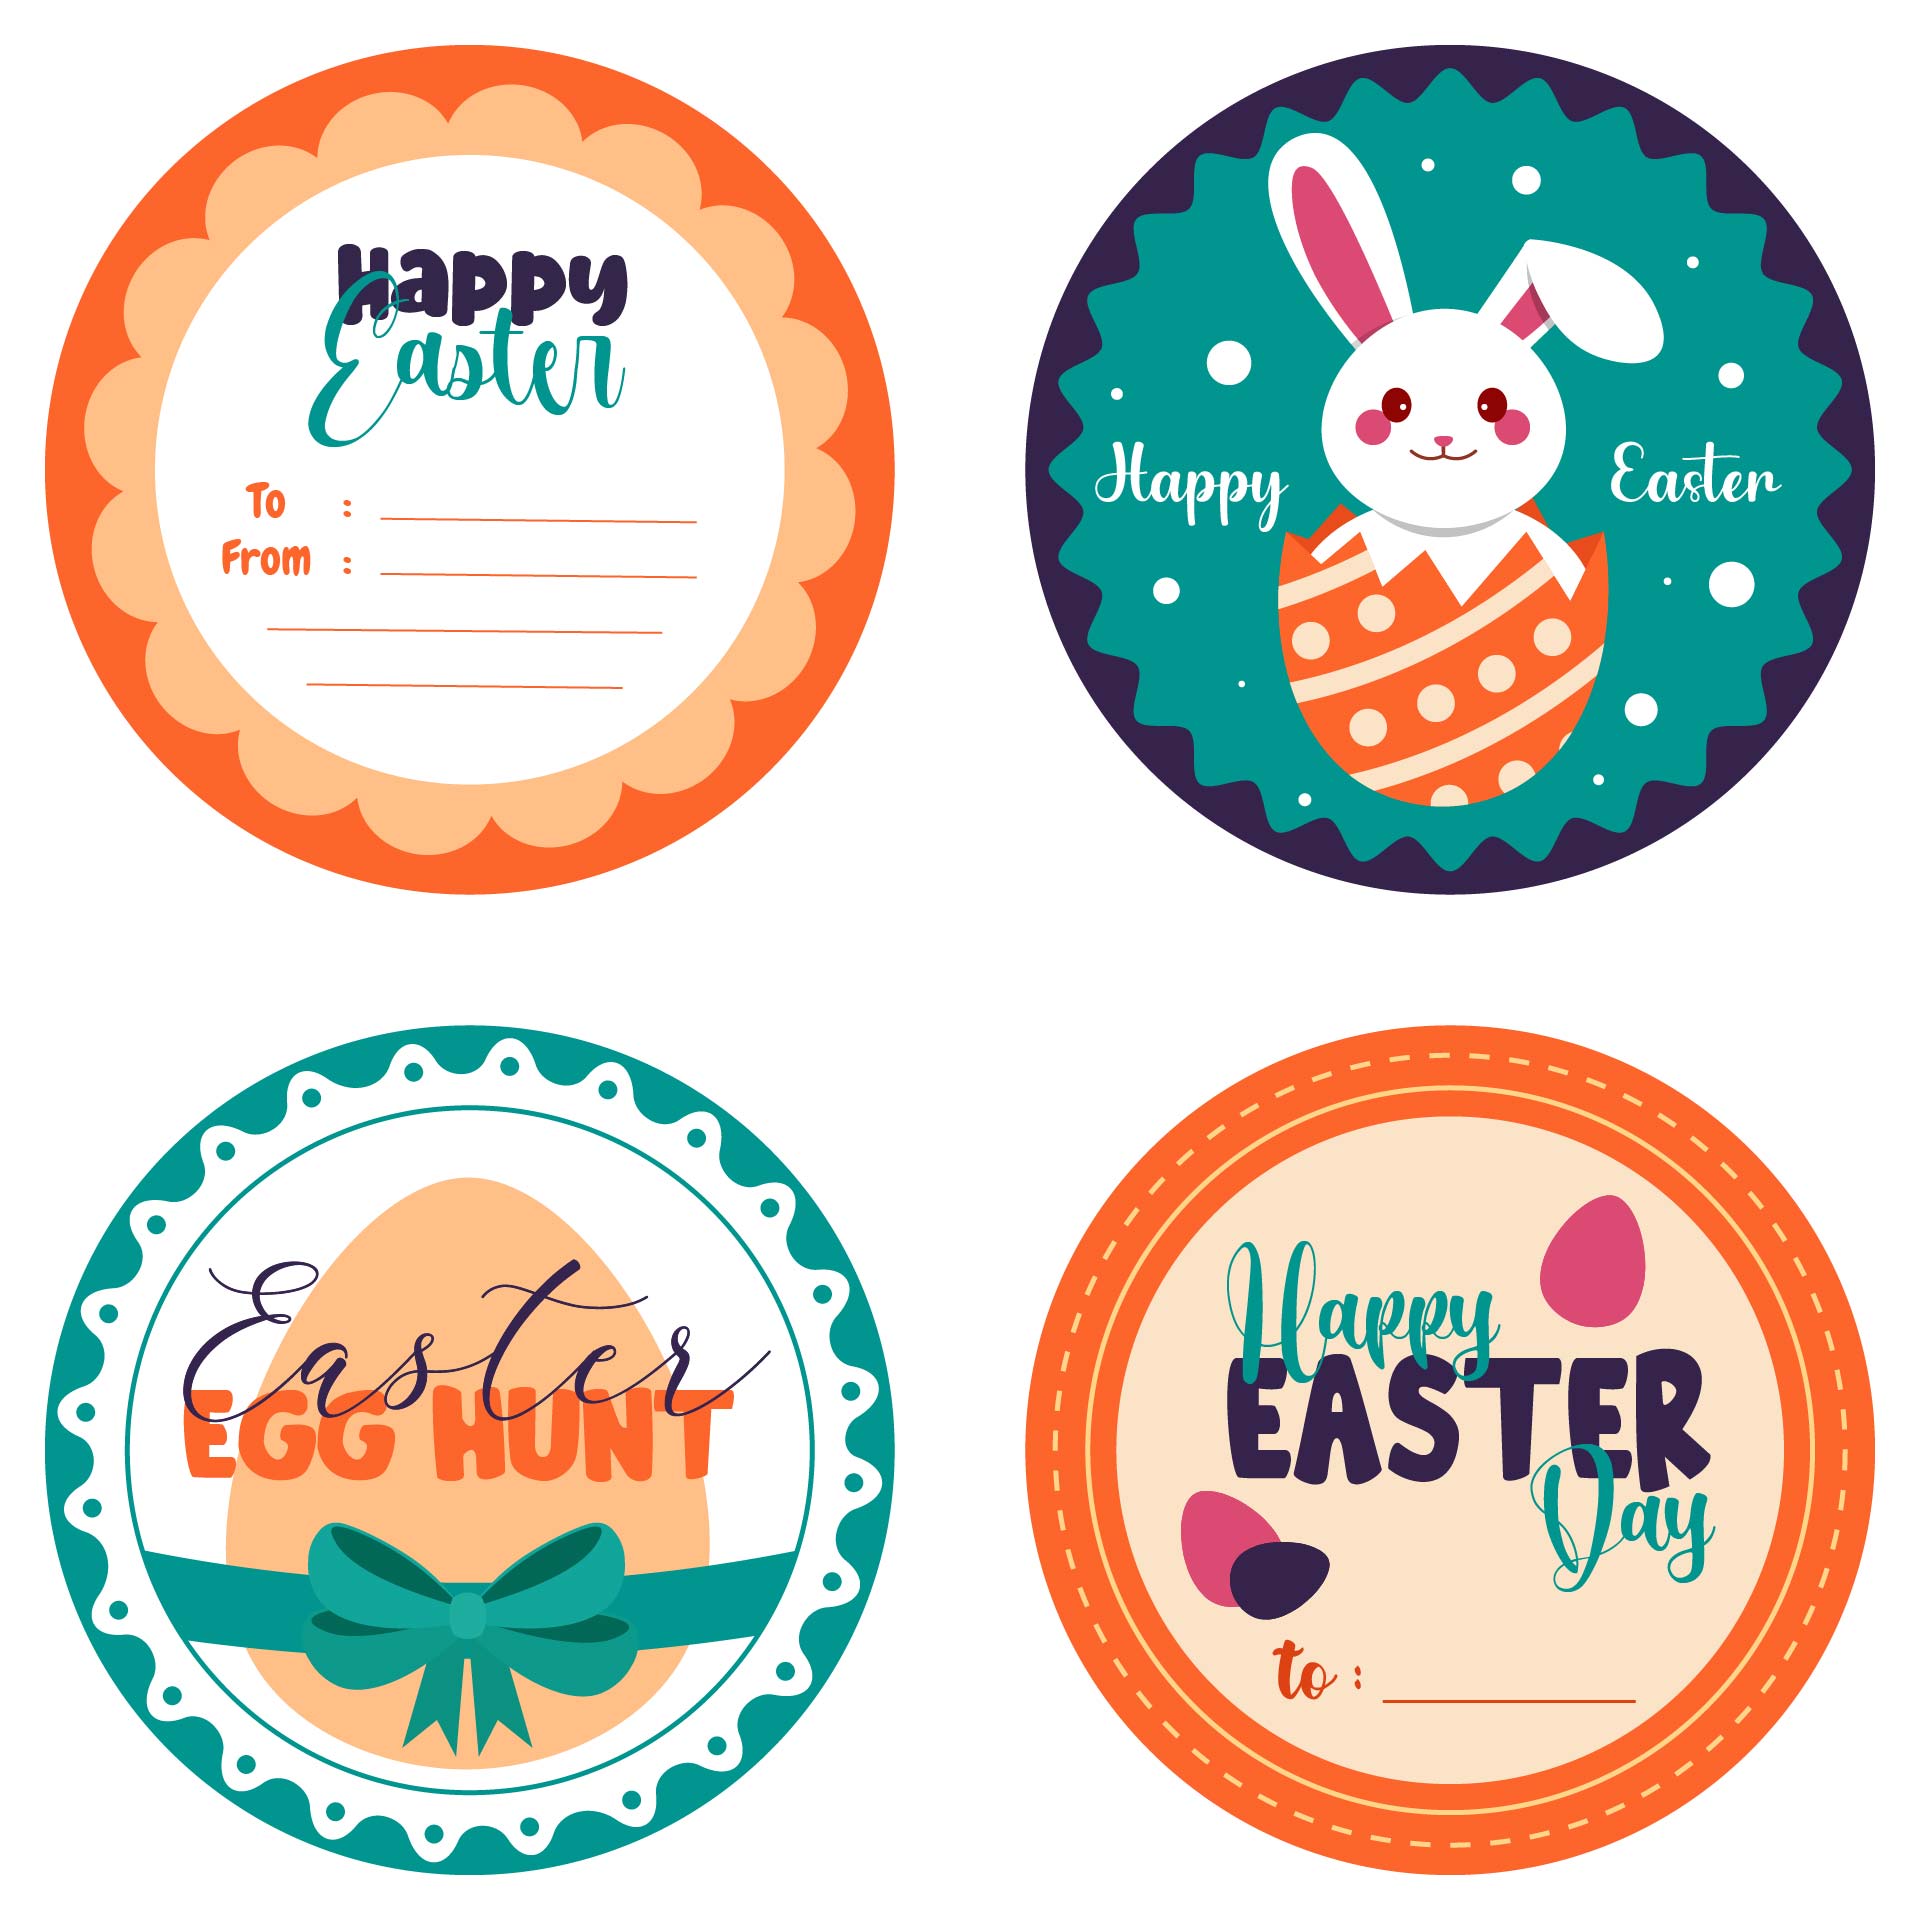 4-best-images-of-happy-easter-gift-tags-free-printables-free-printable-easter-gift-tags-free